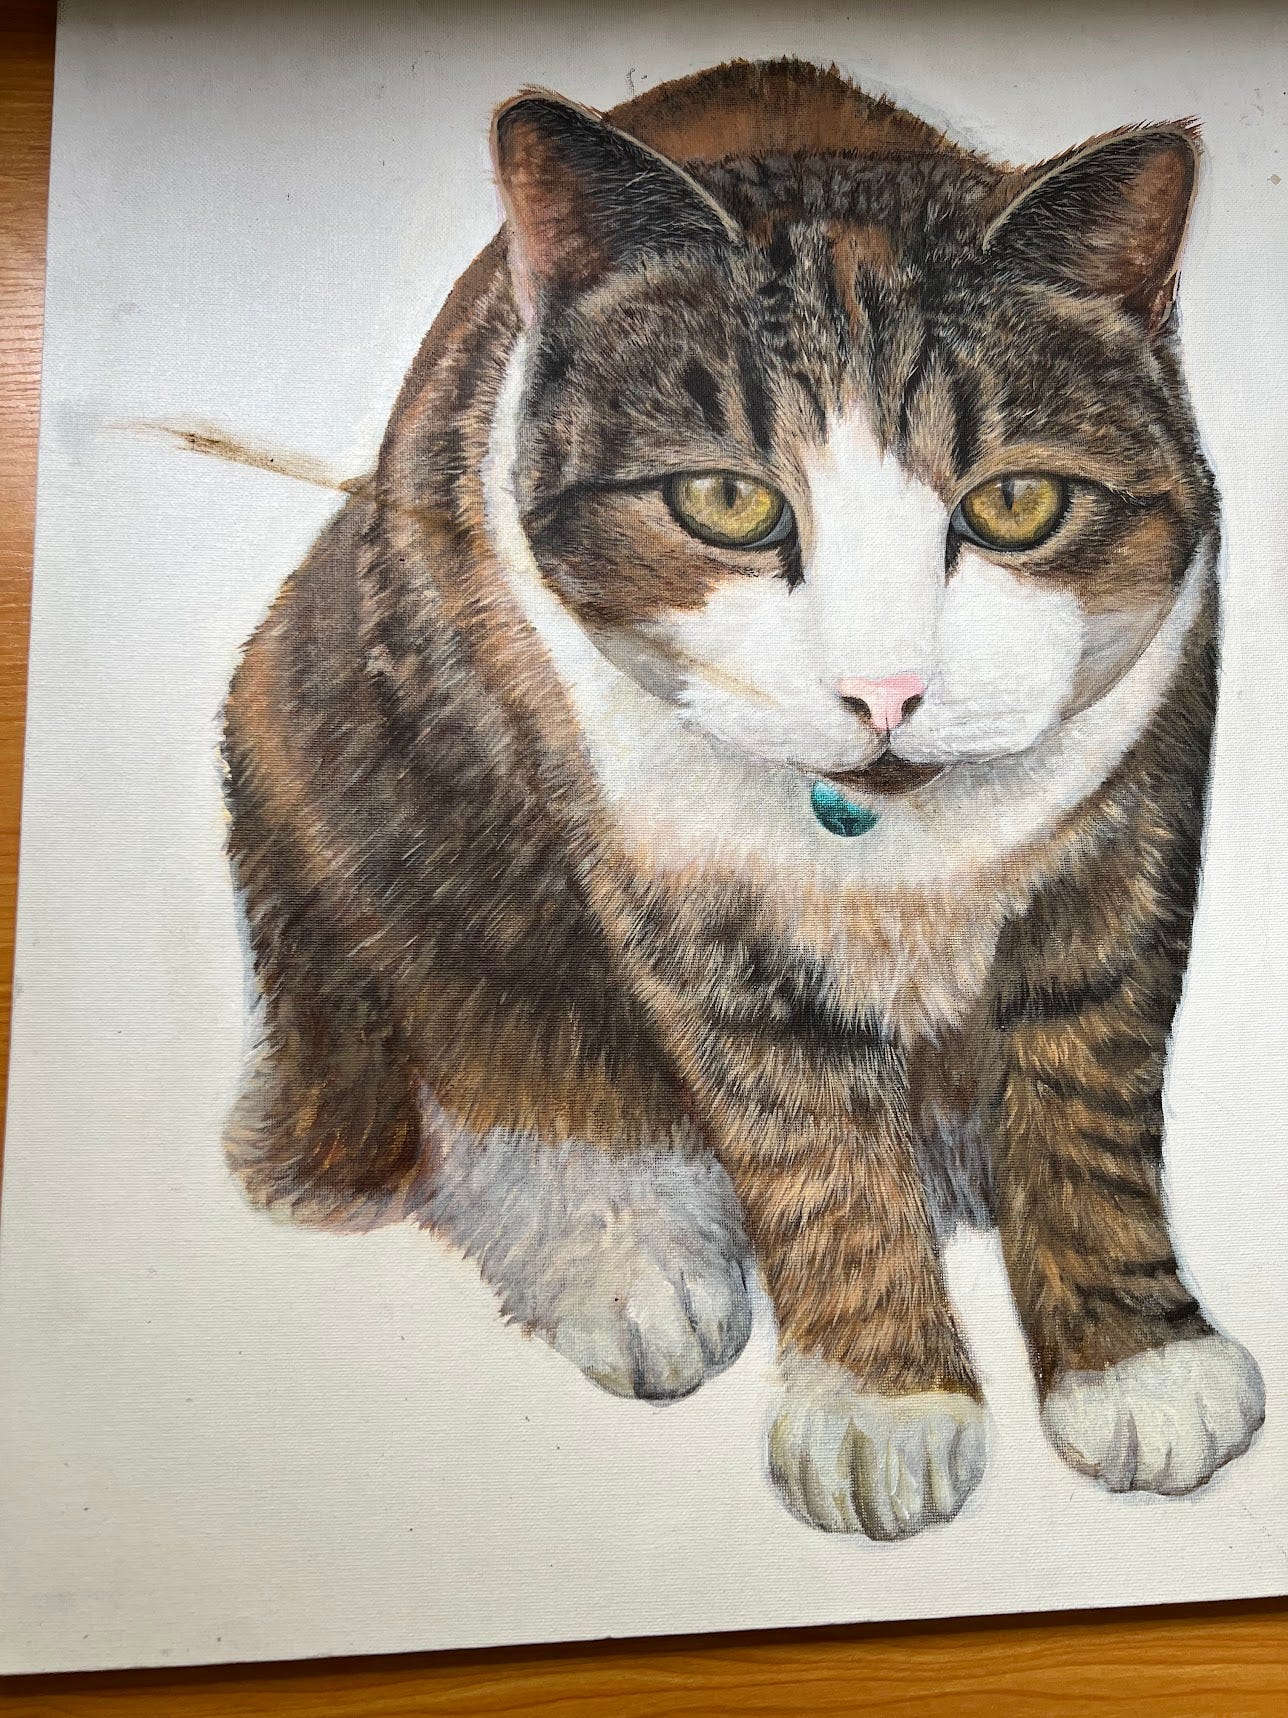 A photo of a painting of a cat with a smear of brown cat shit on it.